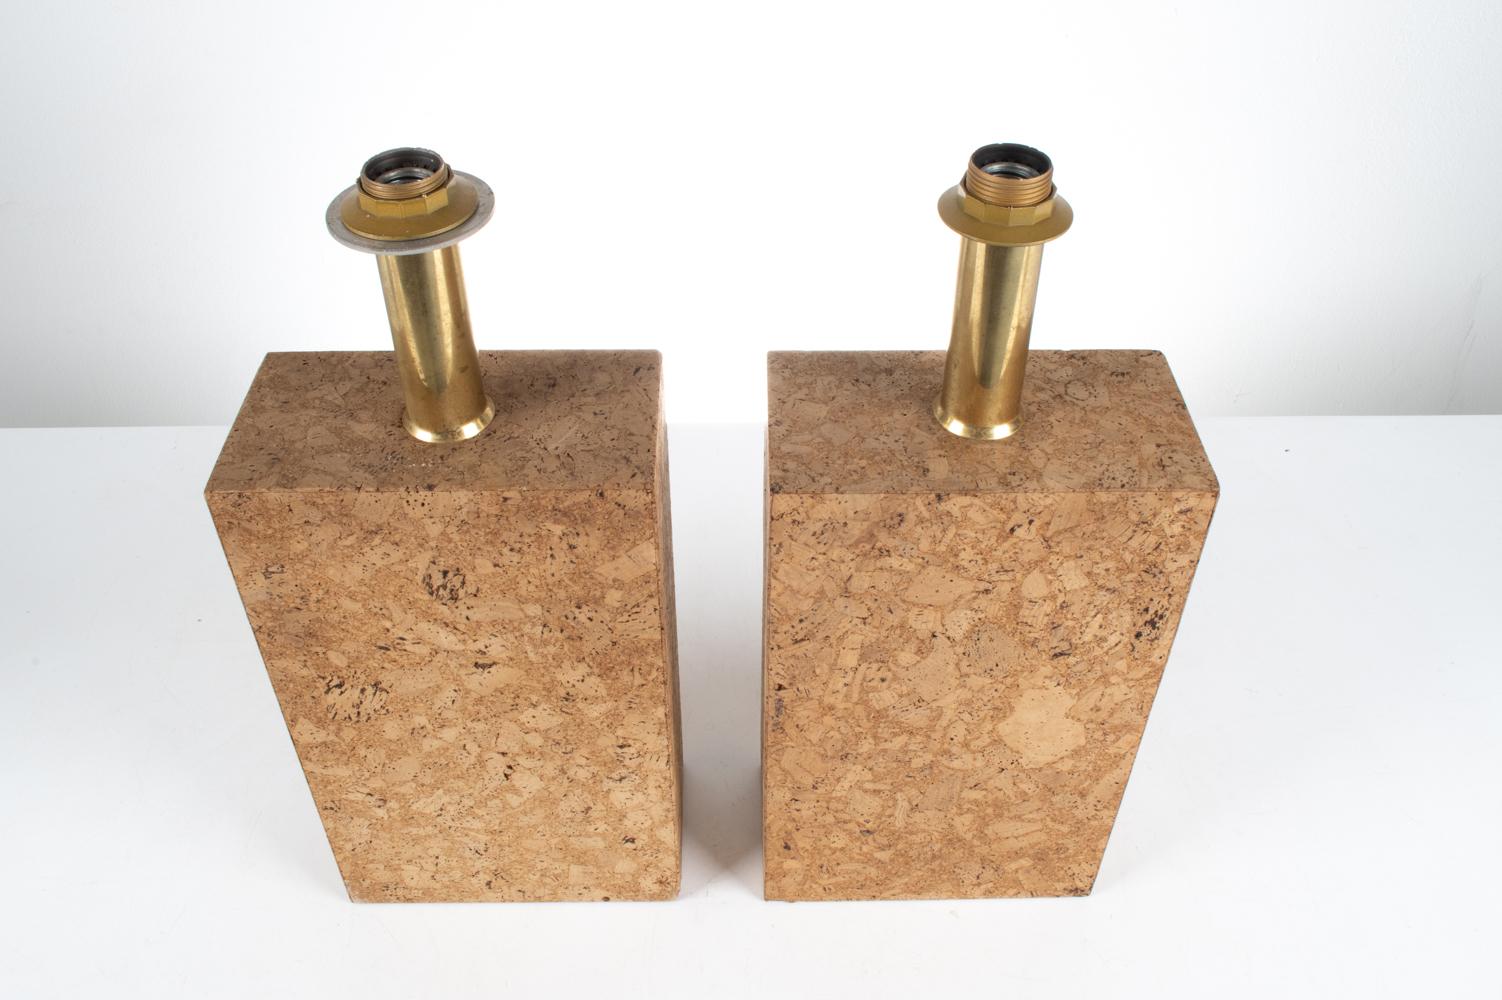 20th Century Pair of Cork Monolith Table Lamps in the Stye of Ingo Maurer, c. 1970's For Sale